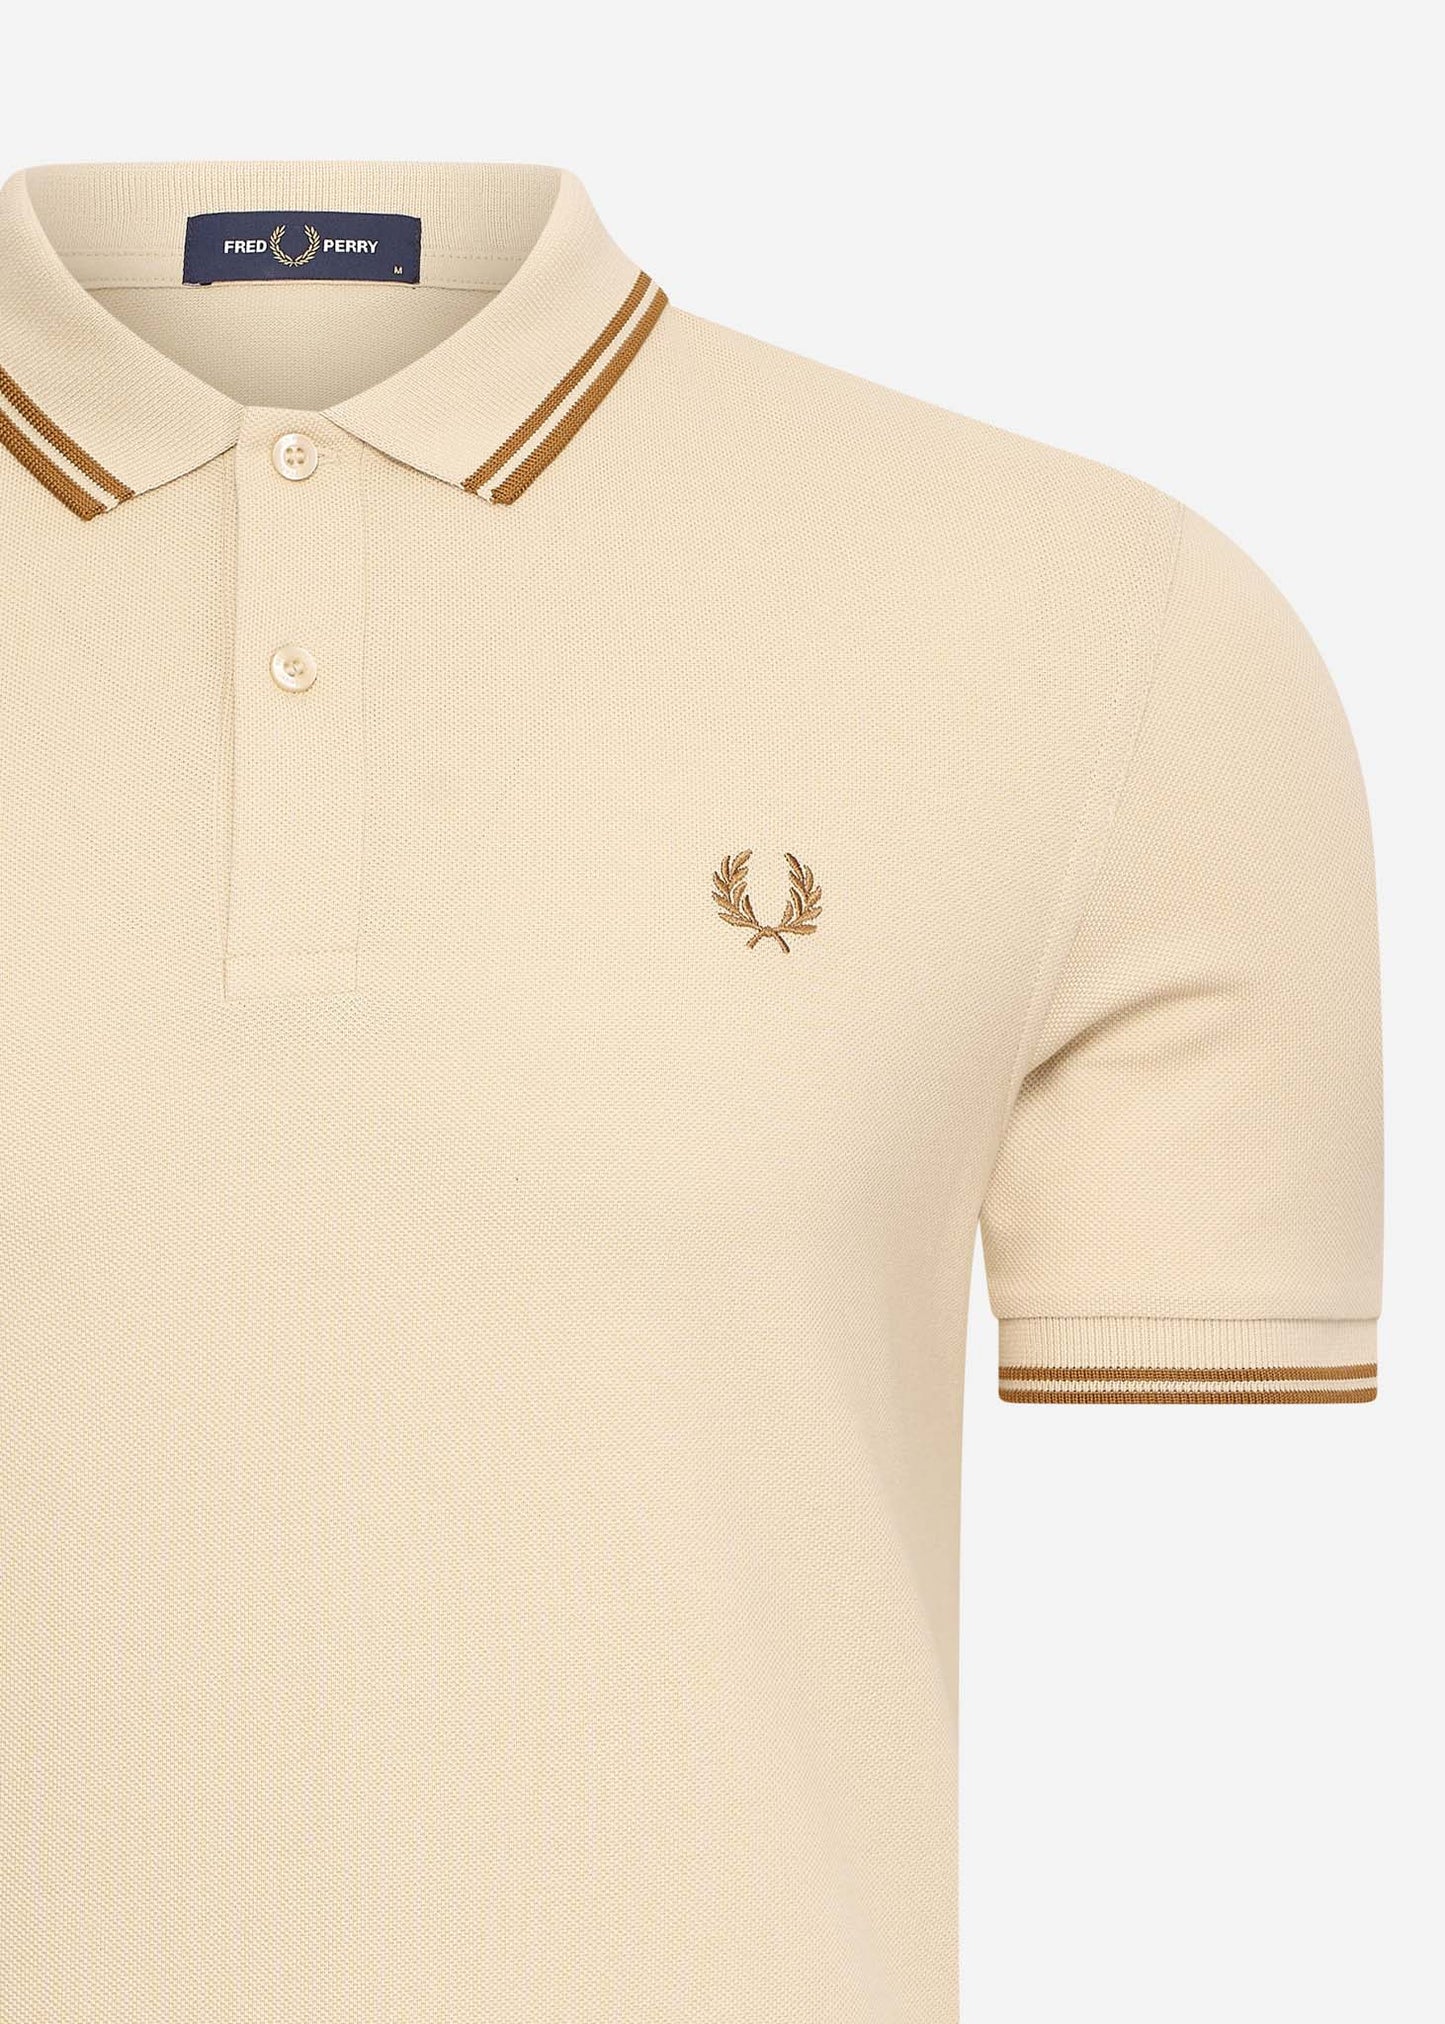 Twin tipped fred perry shirt - oatmeal